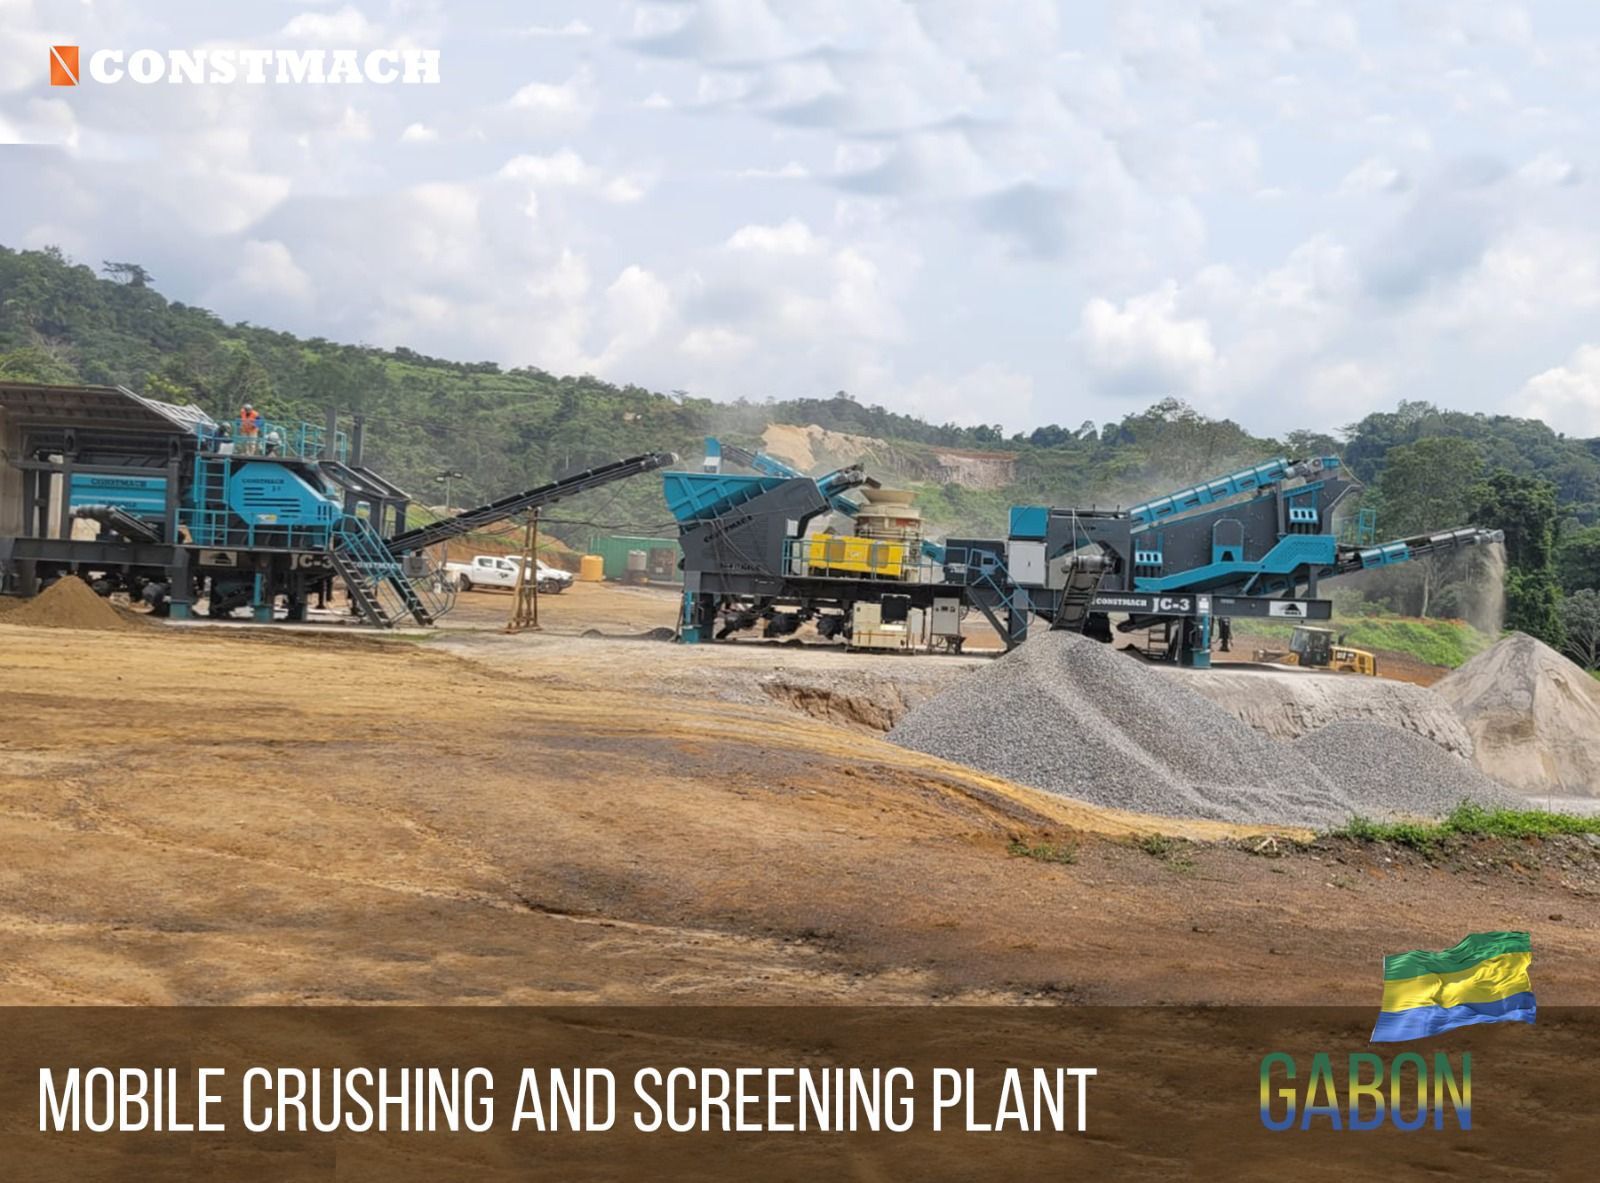 Constmach Concrete Batching Plants & Crushing and Screening Plants - myynti-ilmoitukset undefined: kuva Constmach Concrete Batching Plants & Crushing and Screening Plants - myynti-ilmoitukset undefined